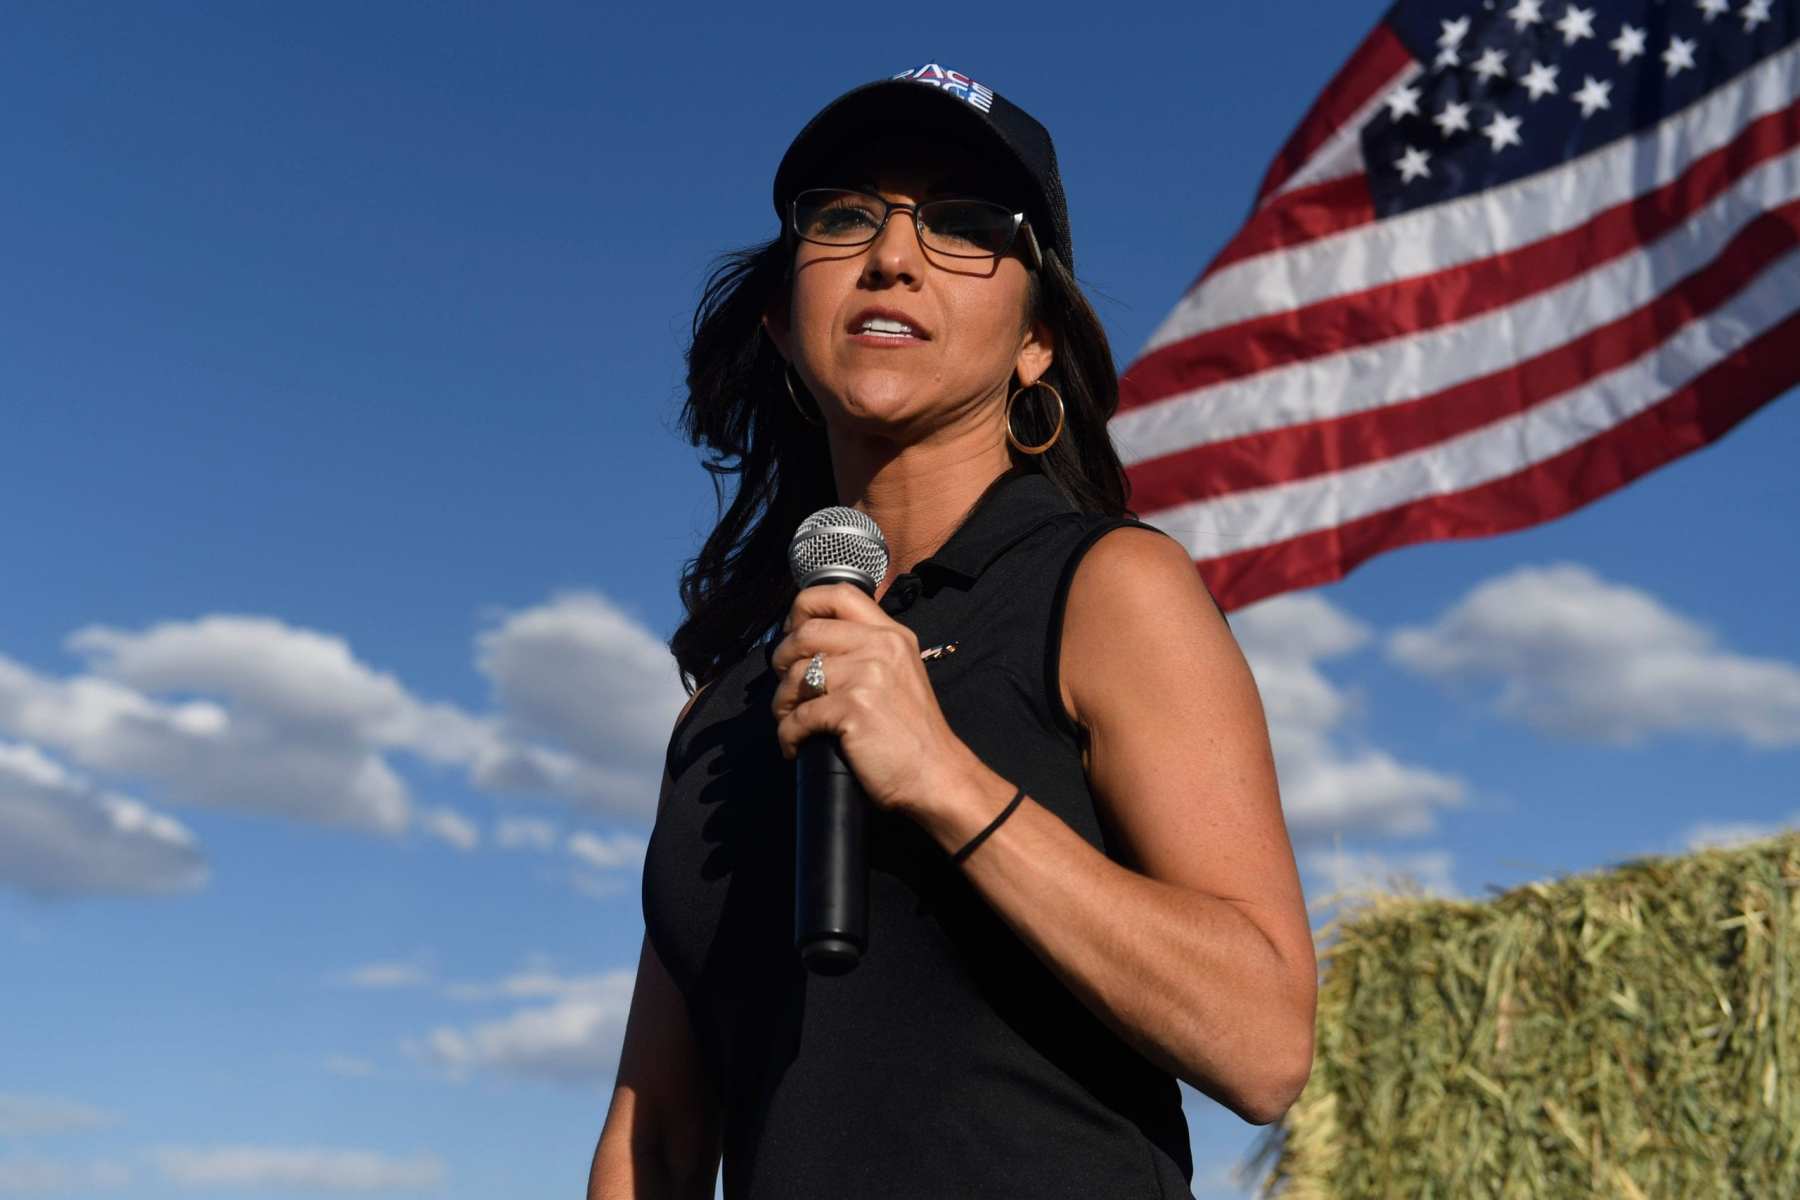 Lauren Boebert, the Republican candidate for the US House of Representatives seat in Colorado's 3rd Congressional District, addresses supporters during a campaign rally in Colona, Colorado on October 10, 2020. - Boebert's meteoric rise into politics began in September 2019 when she confronted US Democratic presidential candidate Beto ORourke at a campaign rally and stated "Hell no, youre not!" to his proposed mandatory buyback of both AR-15 and AK-47 semi-automatic weapons. With her "Pro-Freedom, Pro-Guns, Pro-Constitution, Pro-Energy, Pro-Life, Pro-Colorado, Pro-America" platform, Boebert defeated 5-term incumbent US Rep. Scott Tipton in Colorado's GOP primary, and is now challenged by former Colorado state lawmaker Democratic candidate Diane Mitsch Bush. A win by Boebert in the November election, would keep Colorado's 3rd Congressional District in the GOP hands. Colorado's 3rd Congressional District which encompasses 29 counties and represents 47 percent of Colorado's geographic territory is the 15th-largest district in the US. (Photo by Jason Connolly / AFP) (Photo by JASON CONNOLLY/AFP via Getty Images)